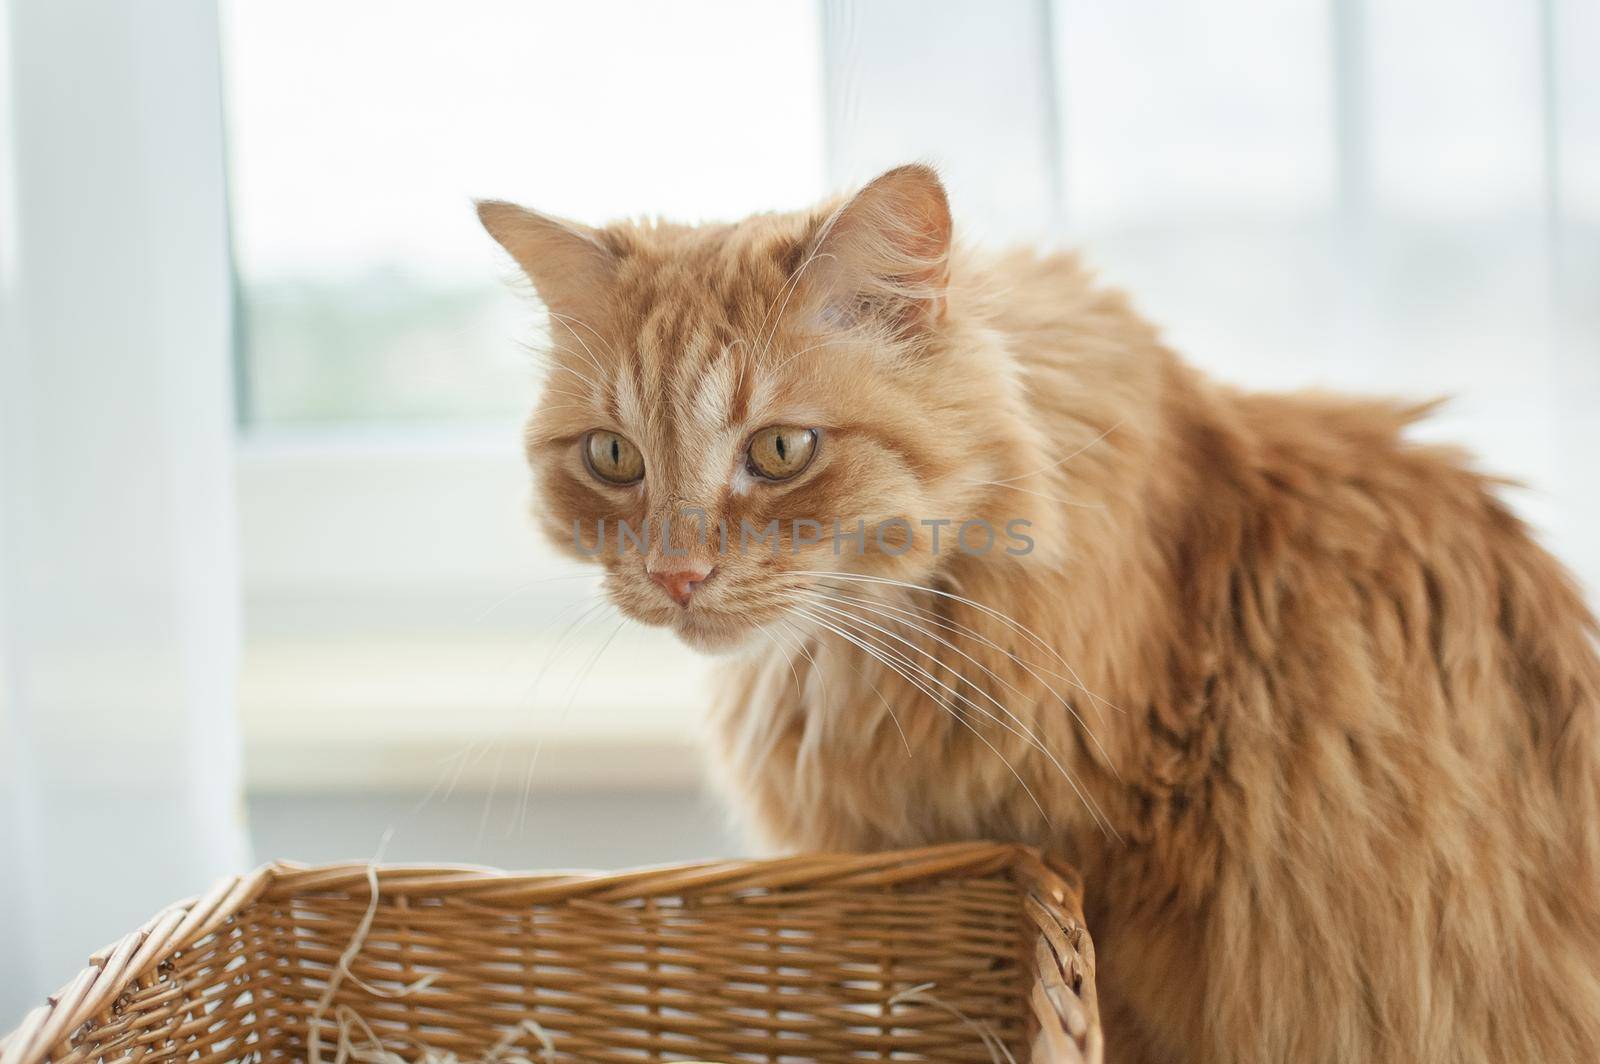 Red young cat is sitting on window background near straw basket, domestic pets concept.